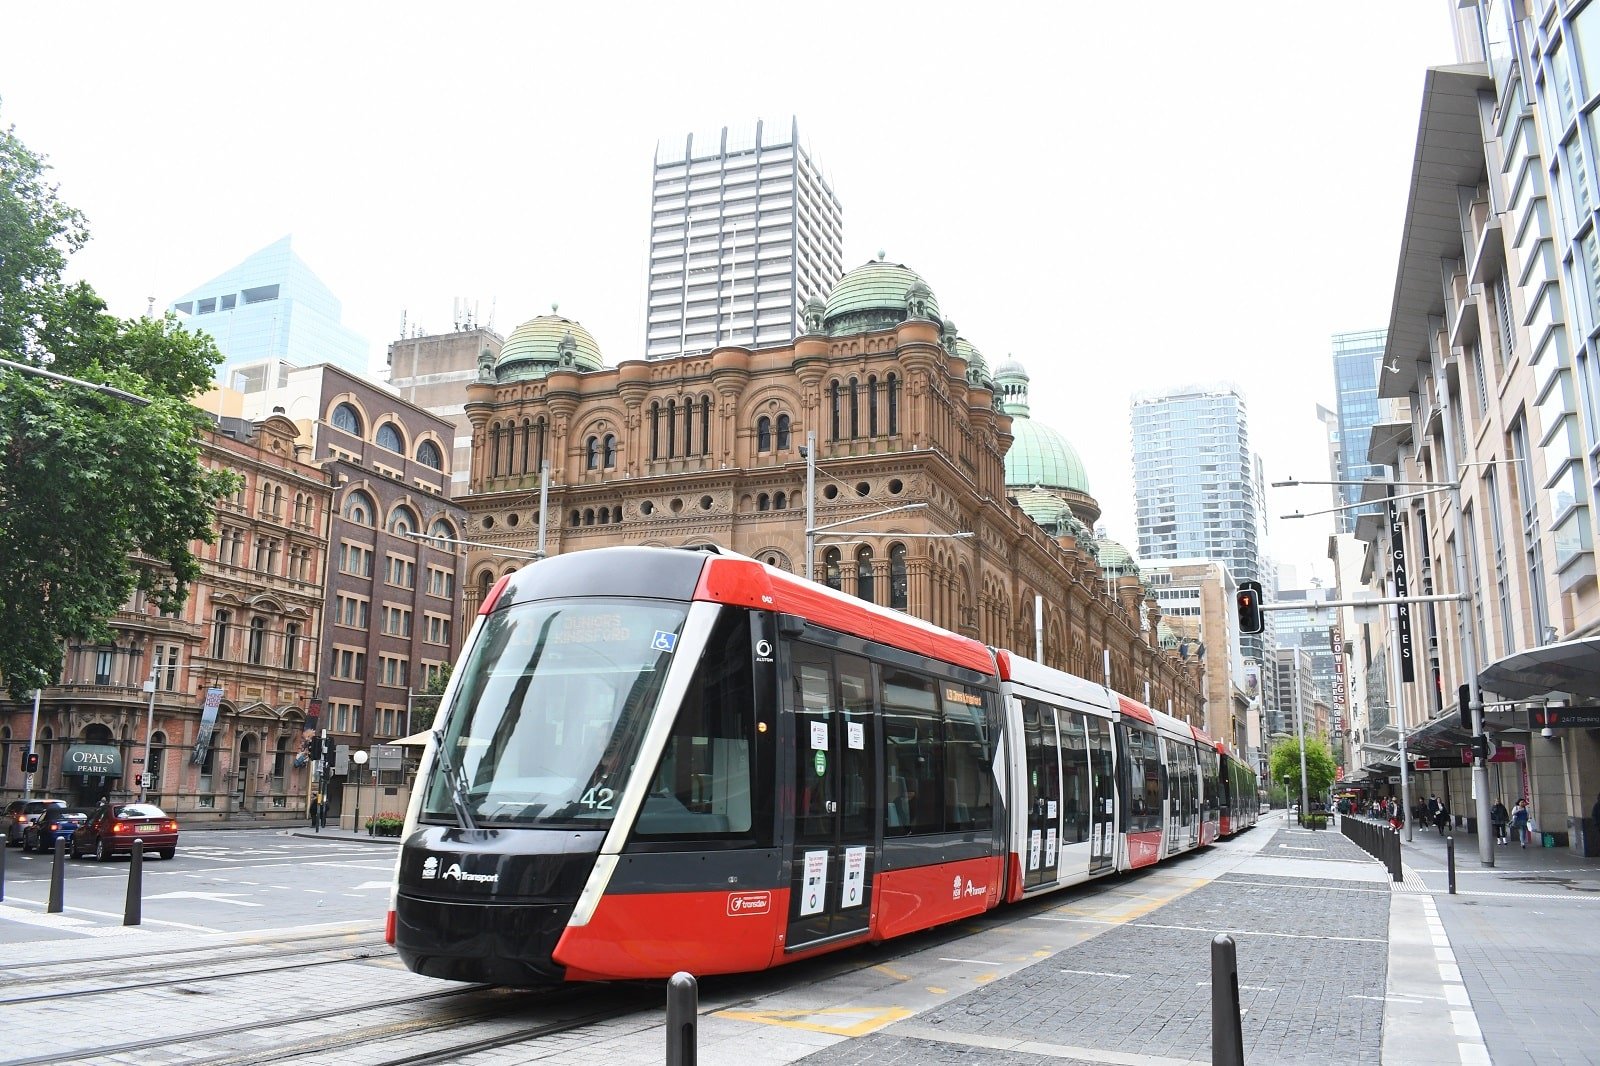 <p><span>Sydney’s train network connects the city center with the suburbs and beyond. The ferry service is scenic, offering stunning views of the Harbour, especially the Sydney Opera House and Harbour Bridge. </span></p> <p><b>Insider’s Tip: </b><span>Use an Opal card to conveniently access trains, buses, ferries, and light rail. </span></p> <p><b>When to Travel: </b><span>Avoid peak commuting times, particularly early morning and late afternoon on weekdays. </span></p>